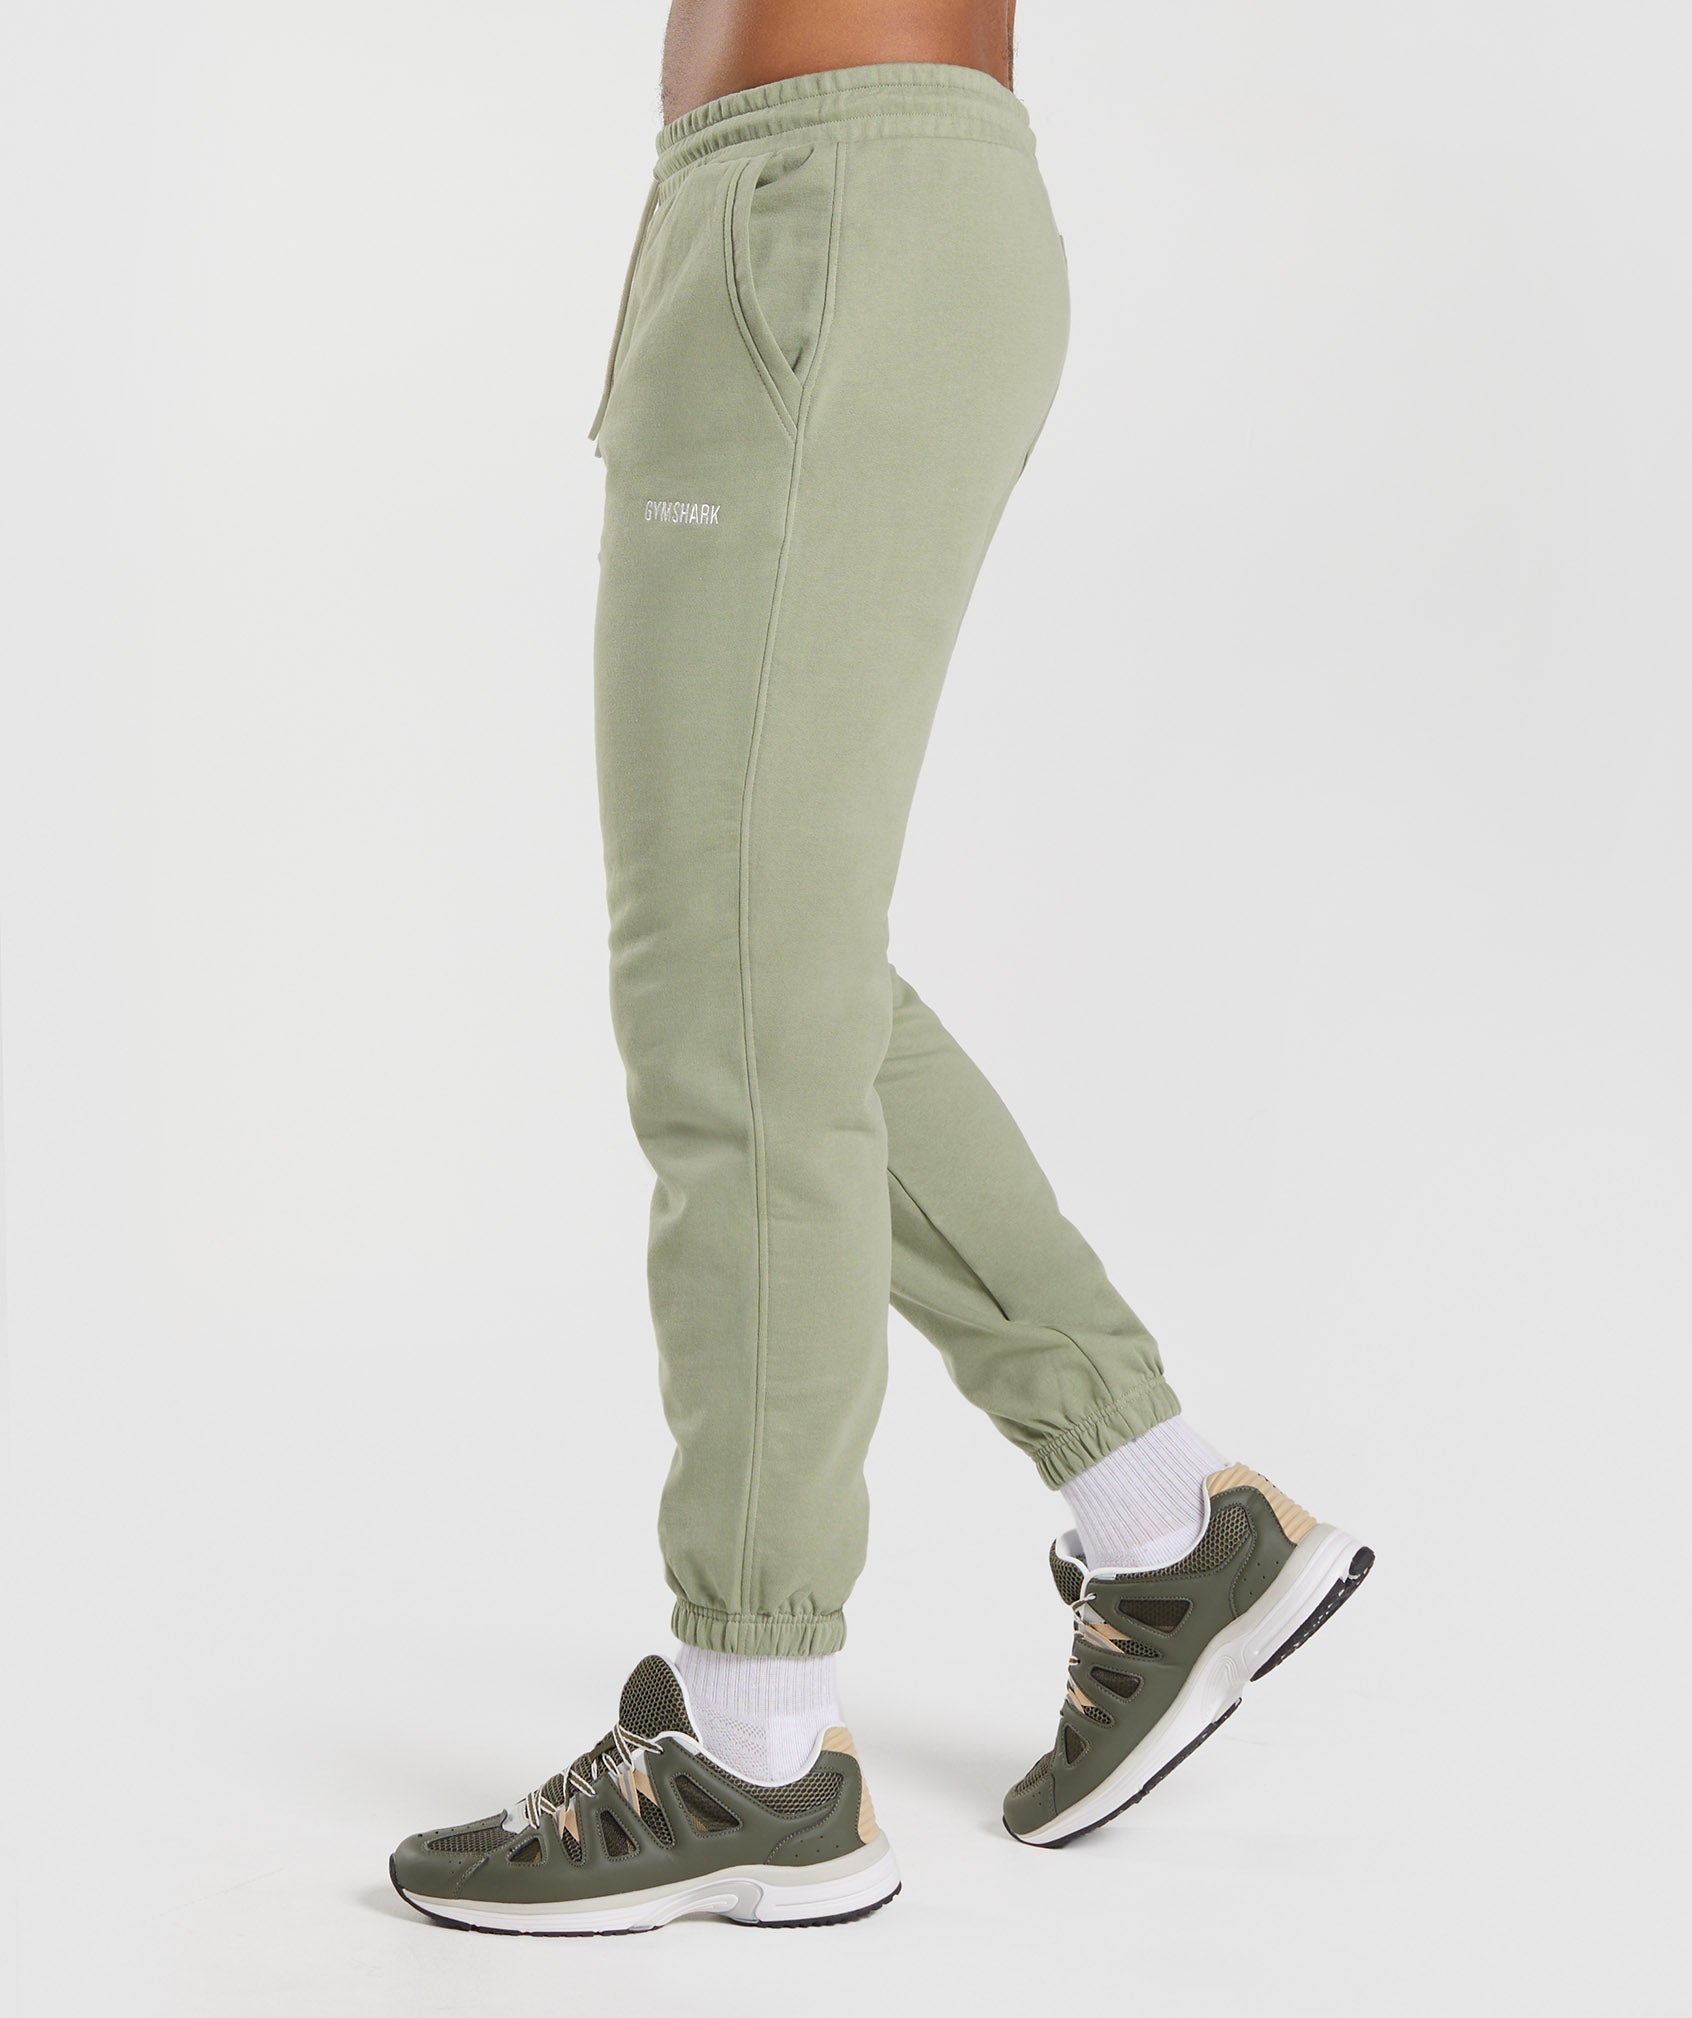 Rest Day Sweats Joggers in Sage Green - view 6